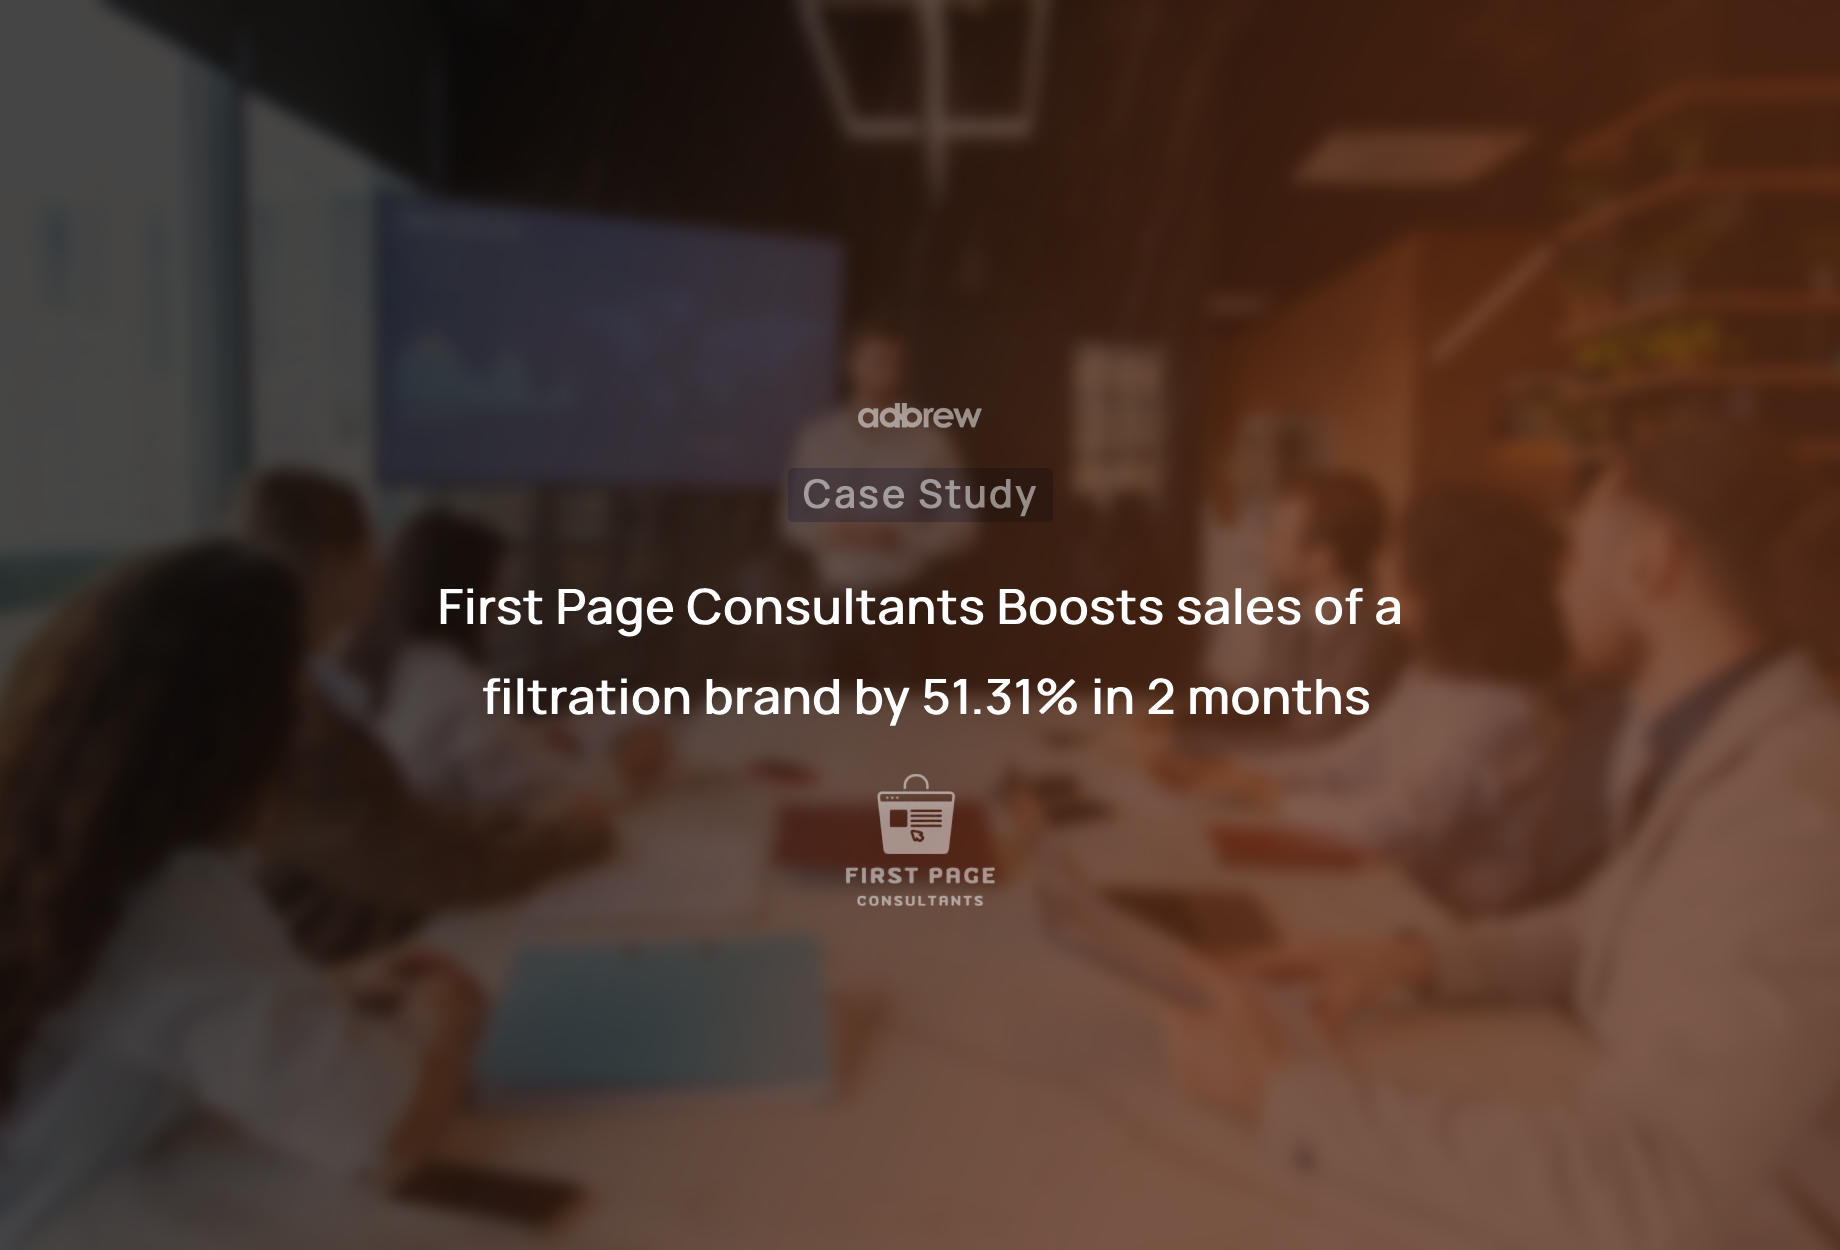 First Page Consultants boosts sales of a Filtration Brand by 51.31% in 2 months